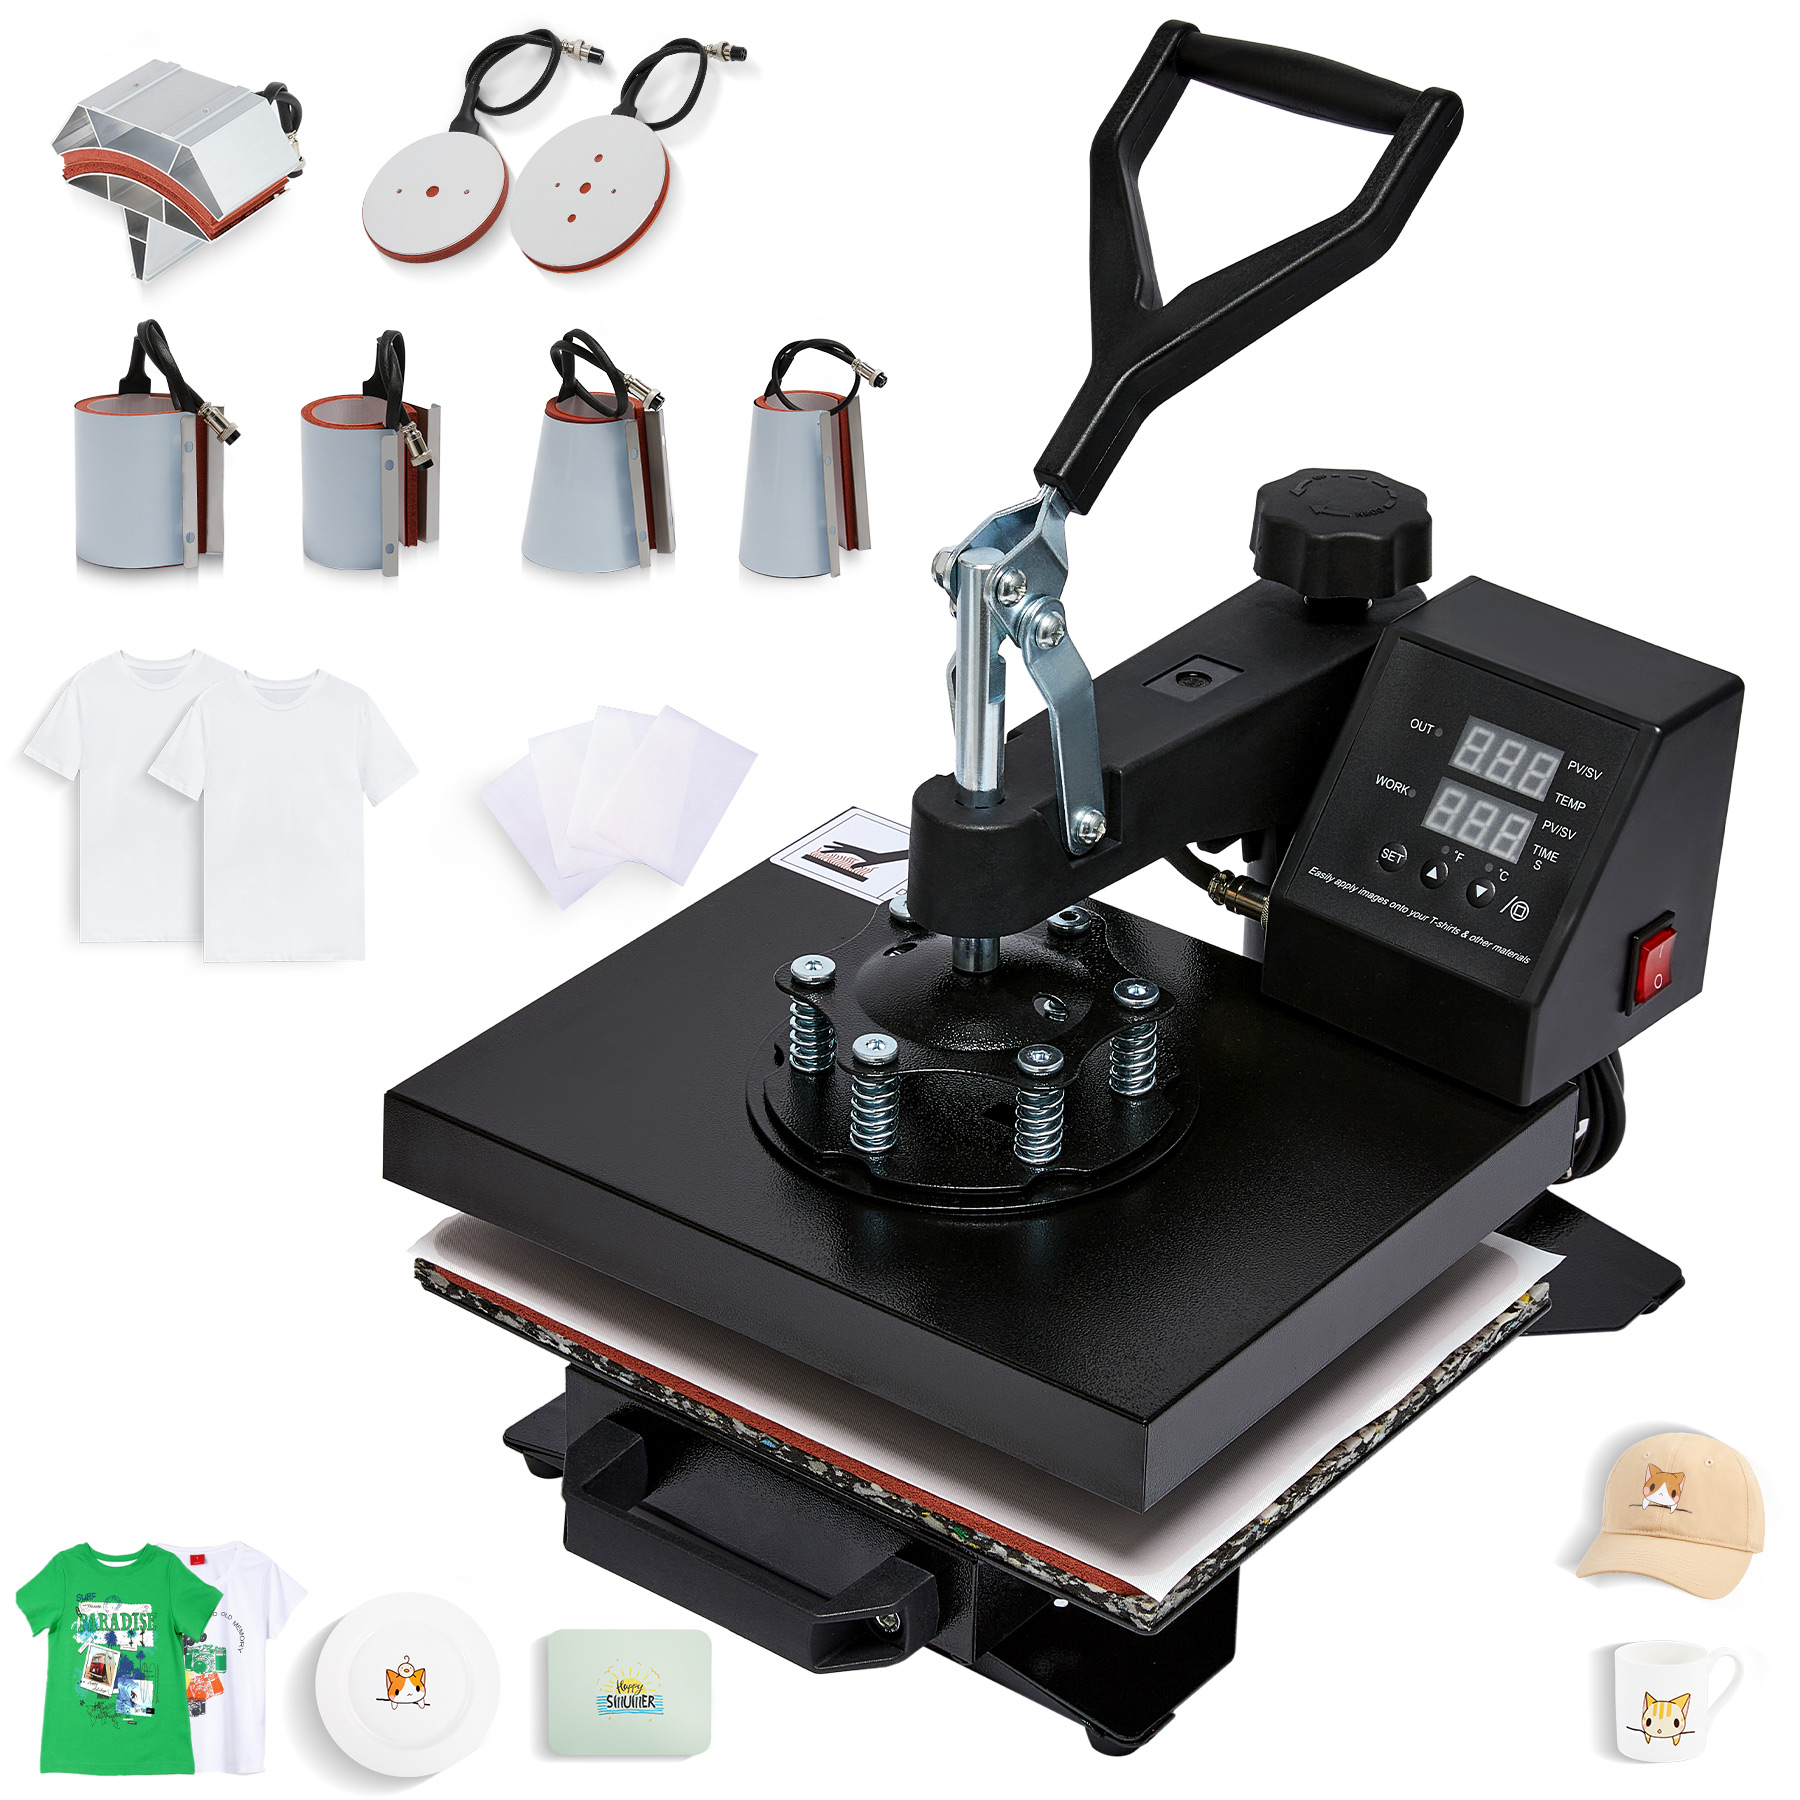 Heat　T　250C　12x10　Machine　for　Heat　Press　Inch　and　Press　8in1　Shirts　900W　More